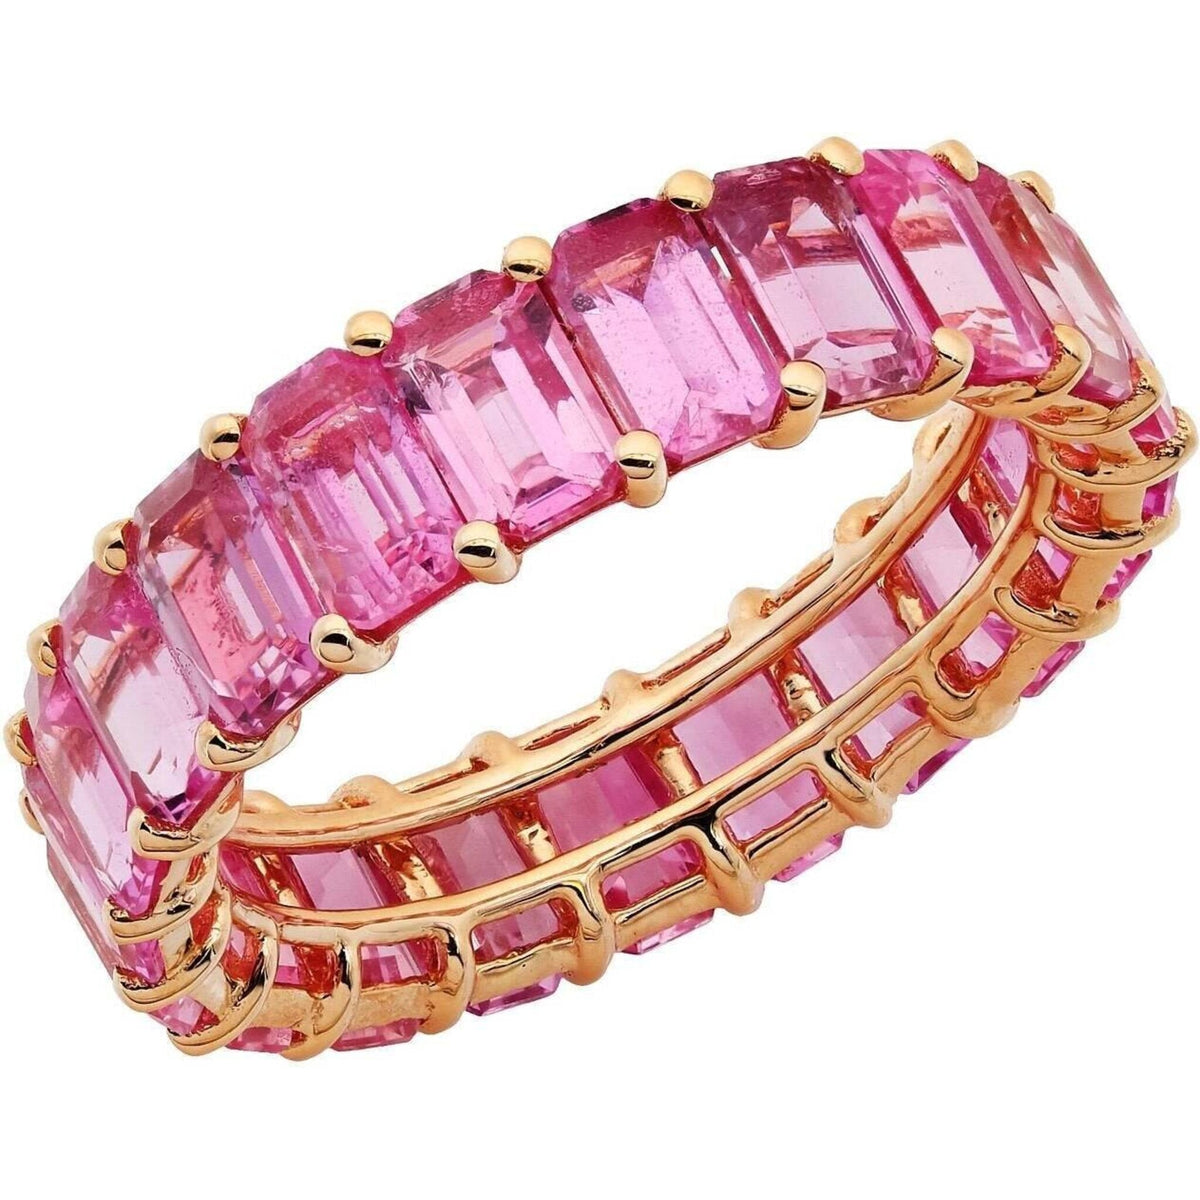 Stunning Pink Sapphire Ring from Robinson's Jewelers